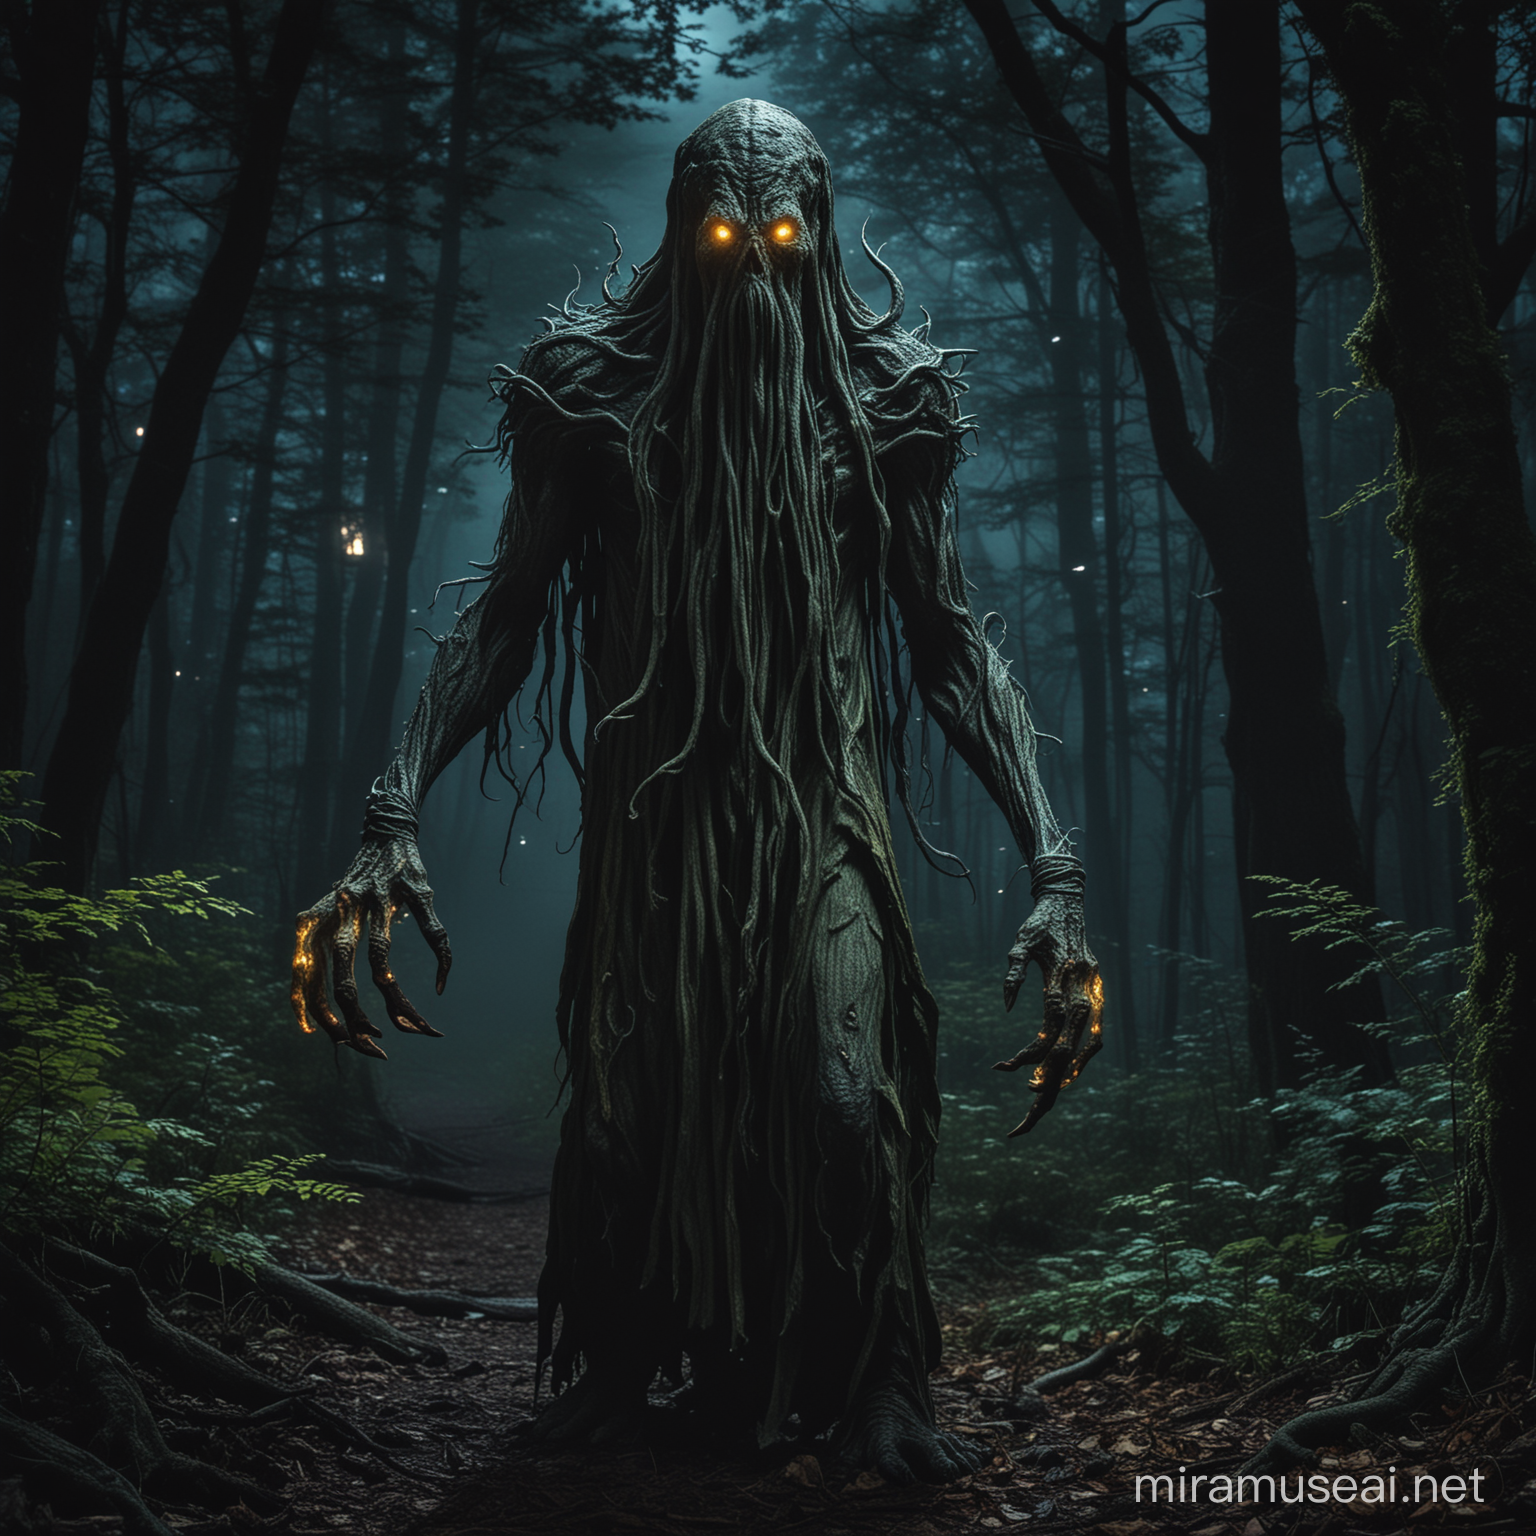 An elder god from the lineage of Hastur wandering through a nighttime forest in Northwest Ohio